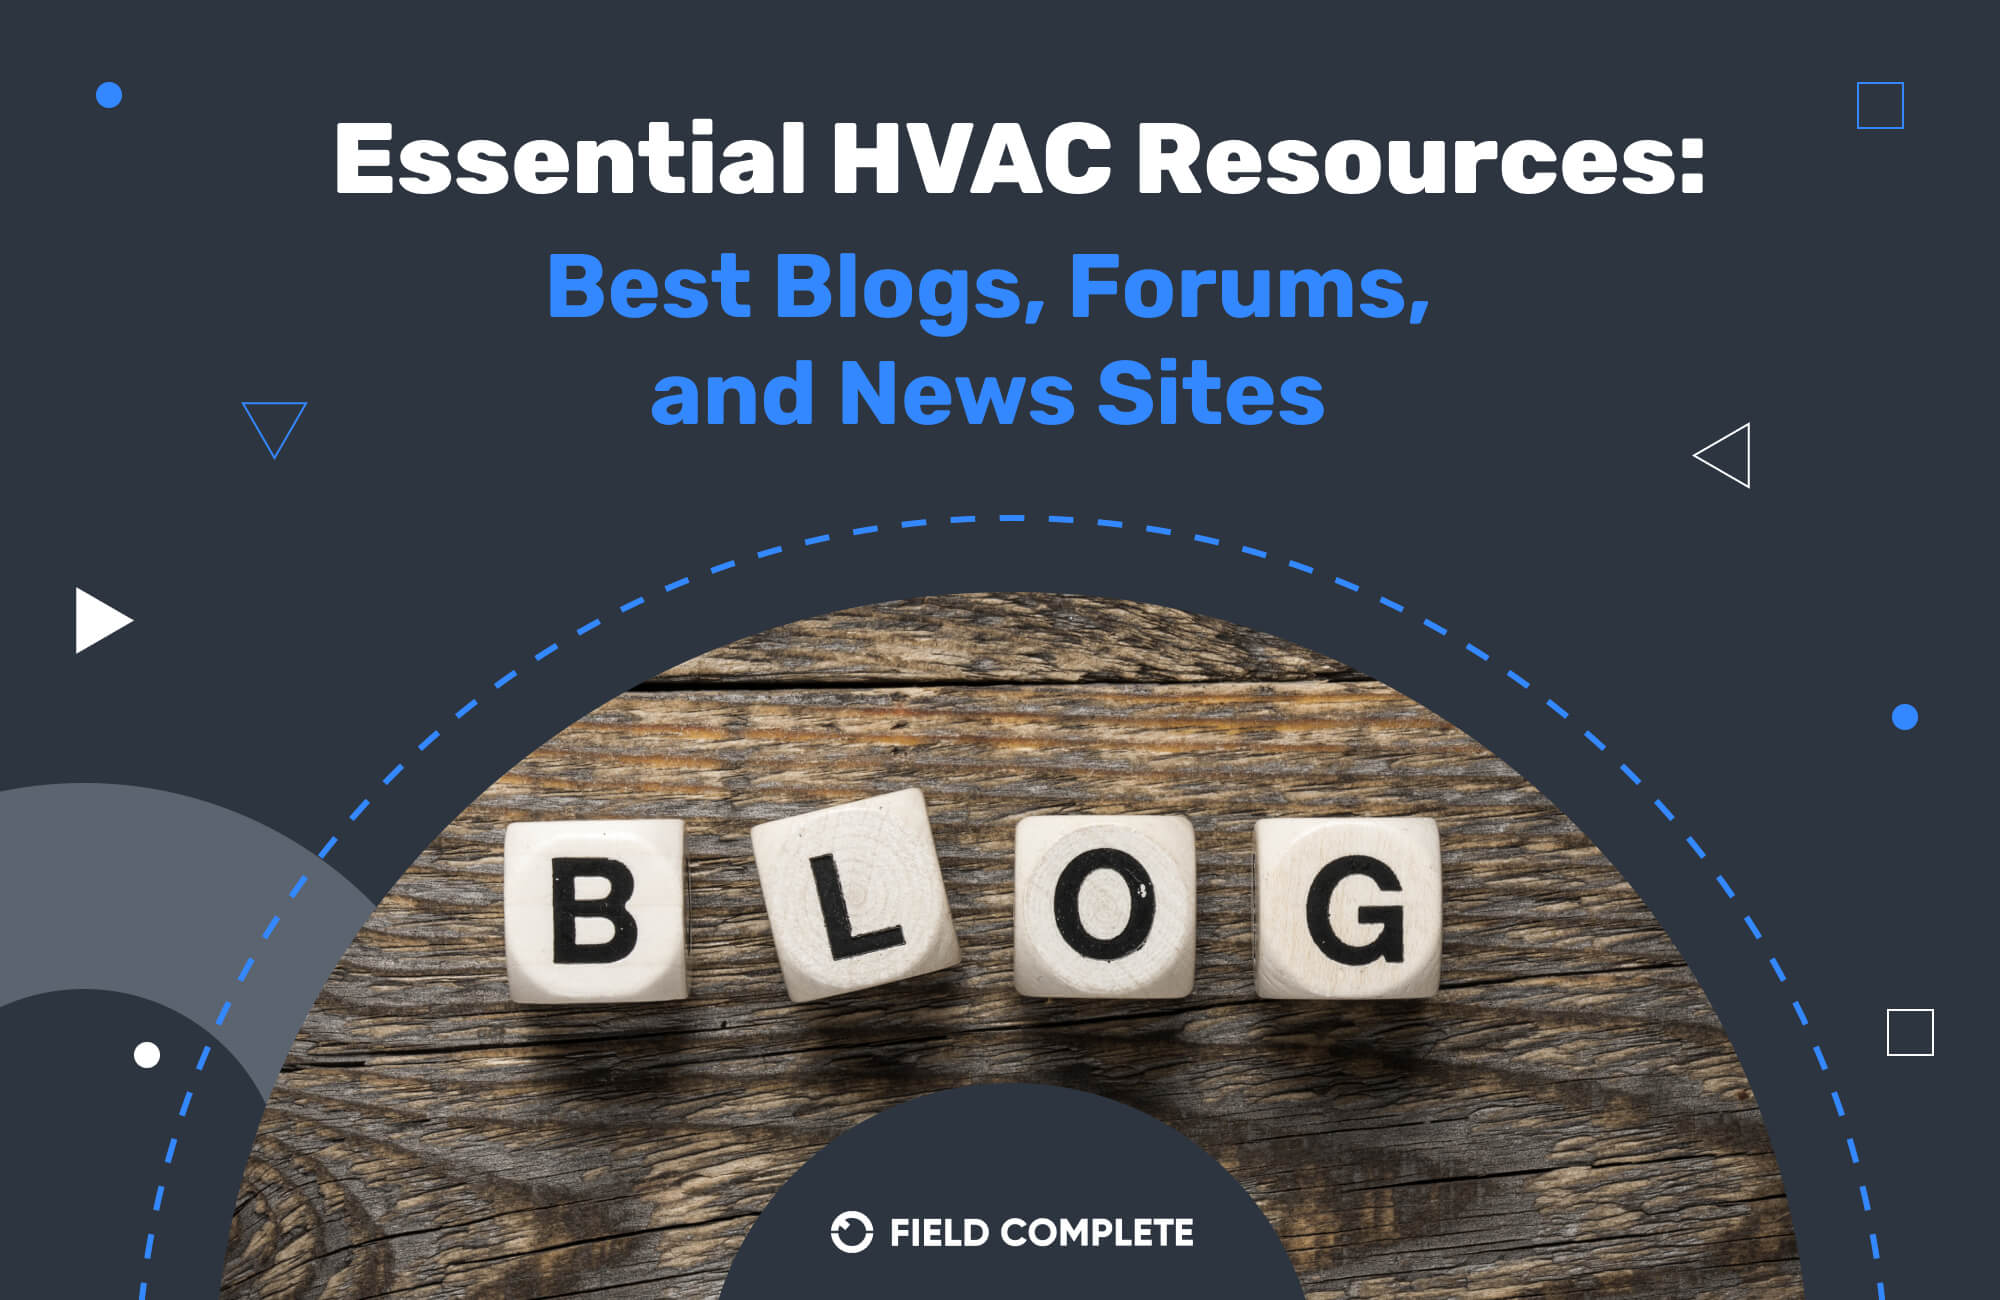 Essential HVAC Resources: Best Blogs, Forums, and News Sites for Contractors